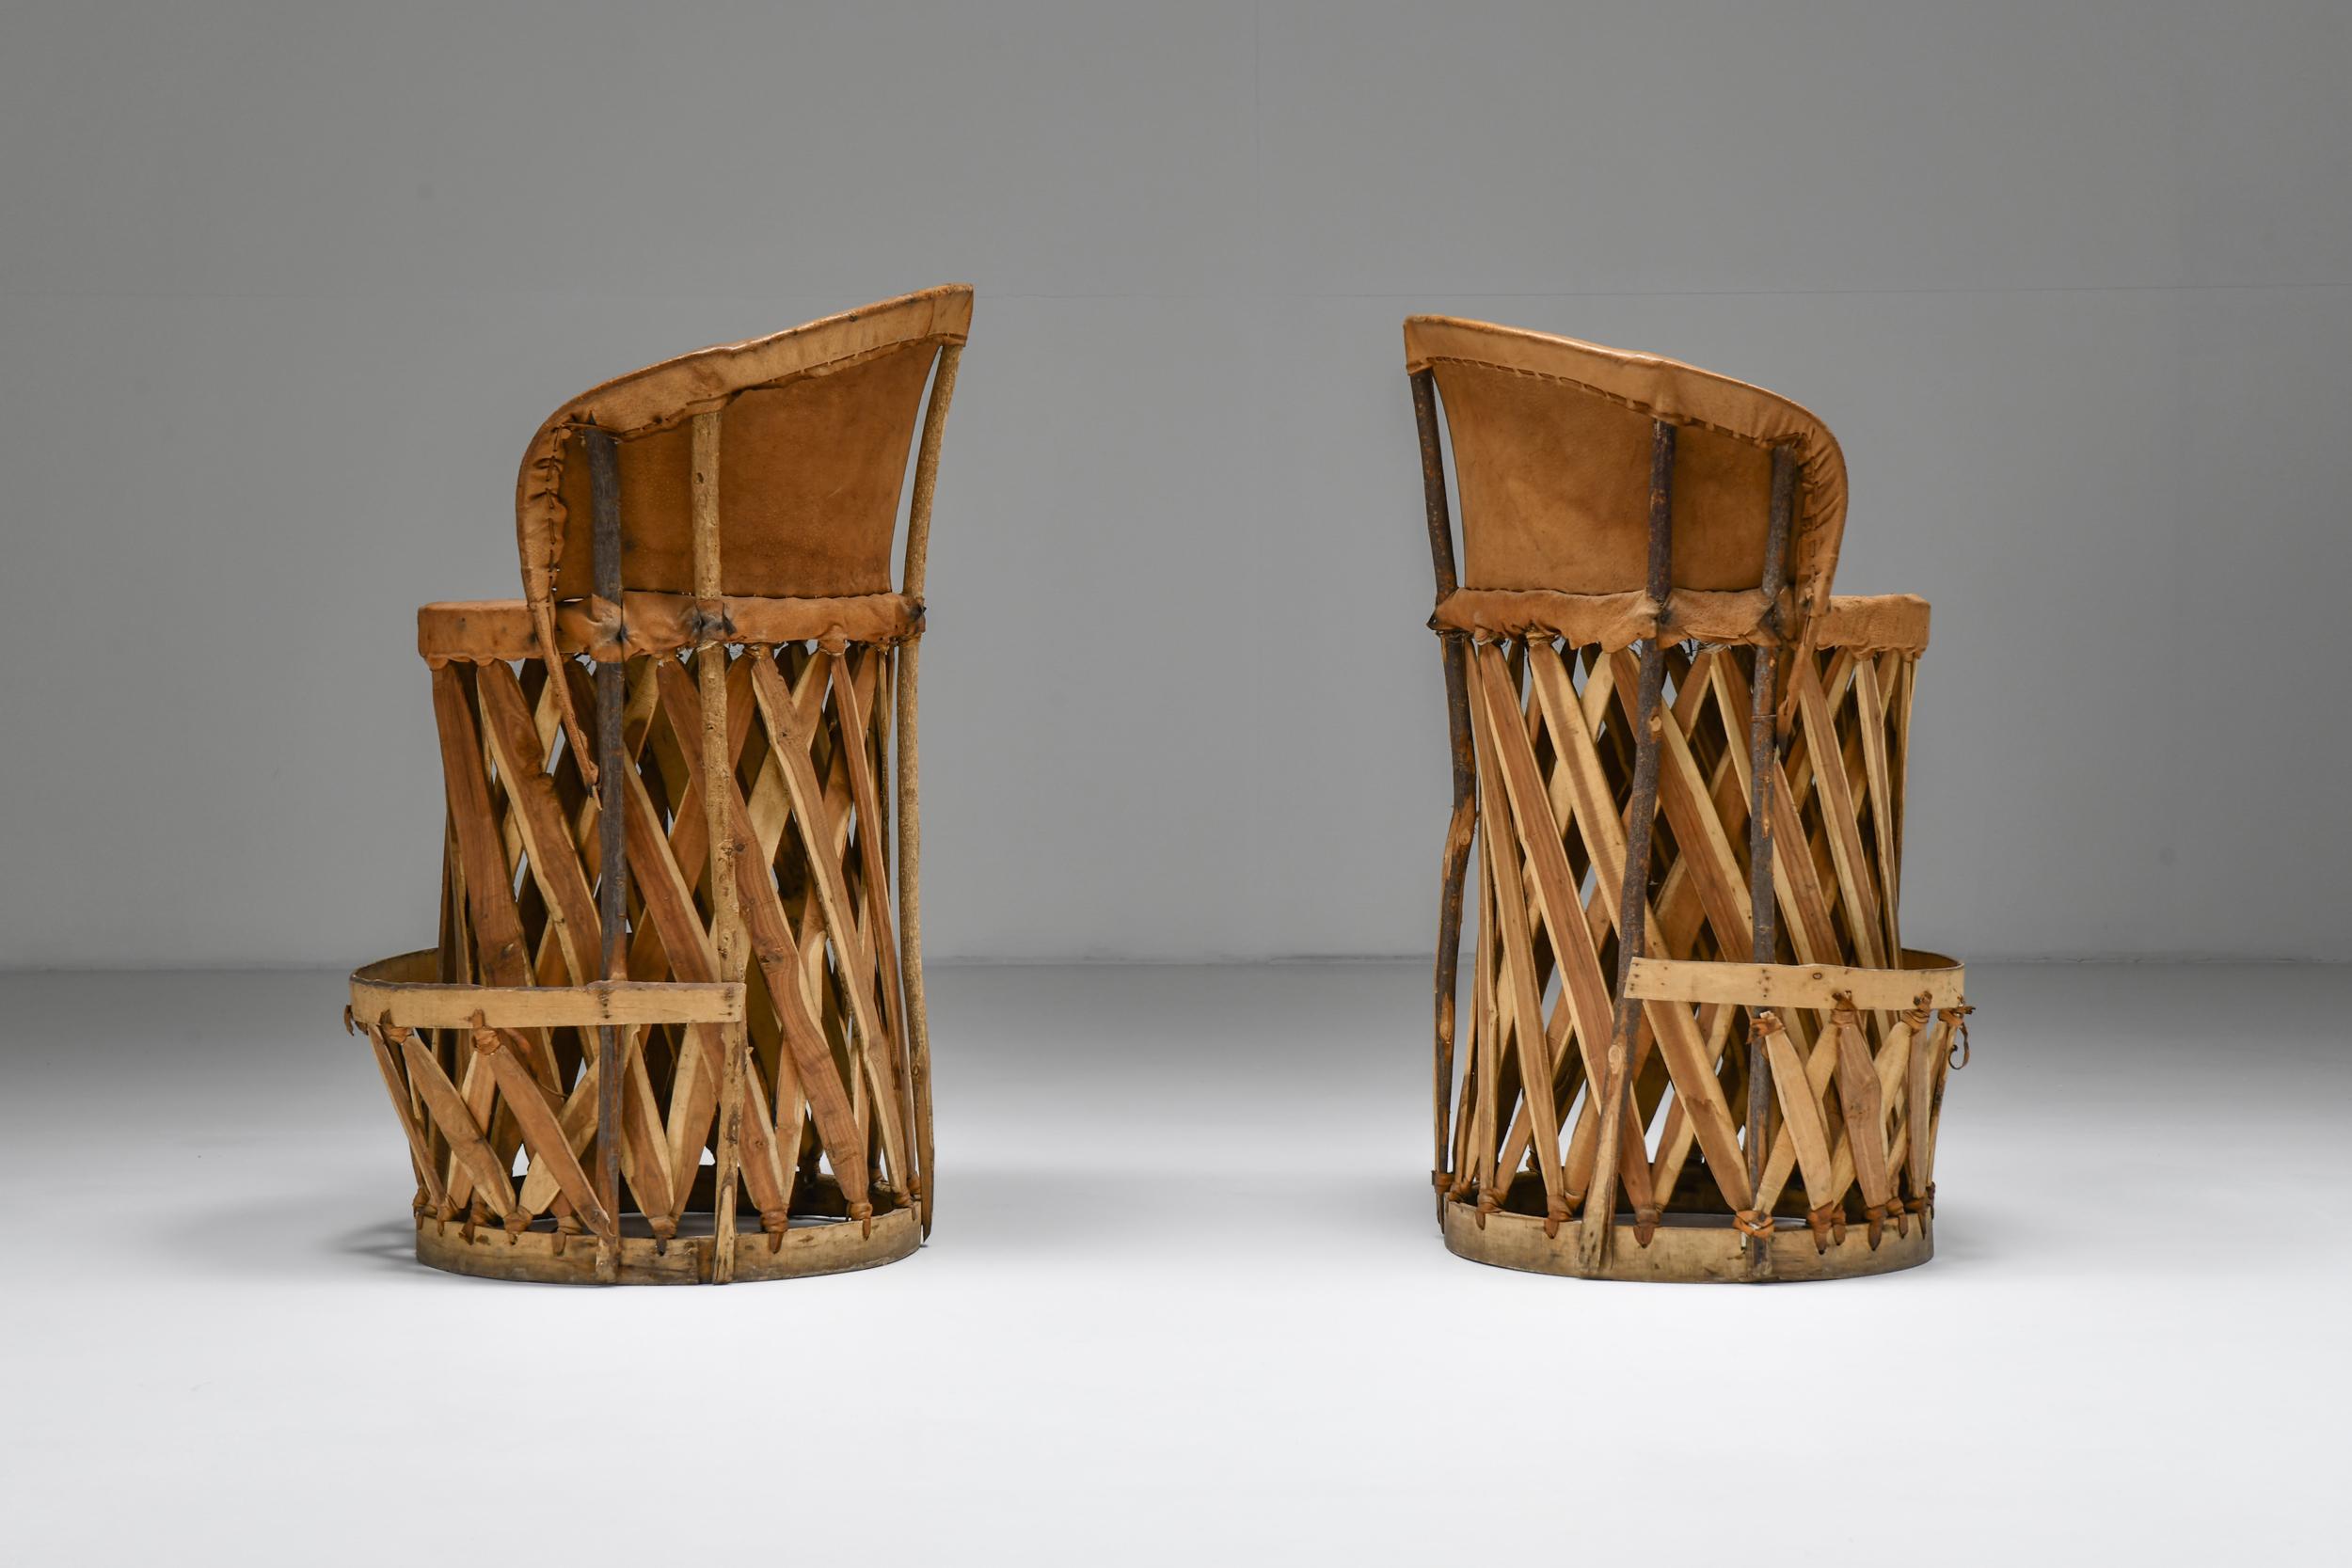 Folk Art barstool that would fit well in a rustic modern or eclectic interior.

Originally designed and made in Mexico, these stools and chairs were distributed by the famous 